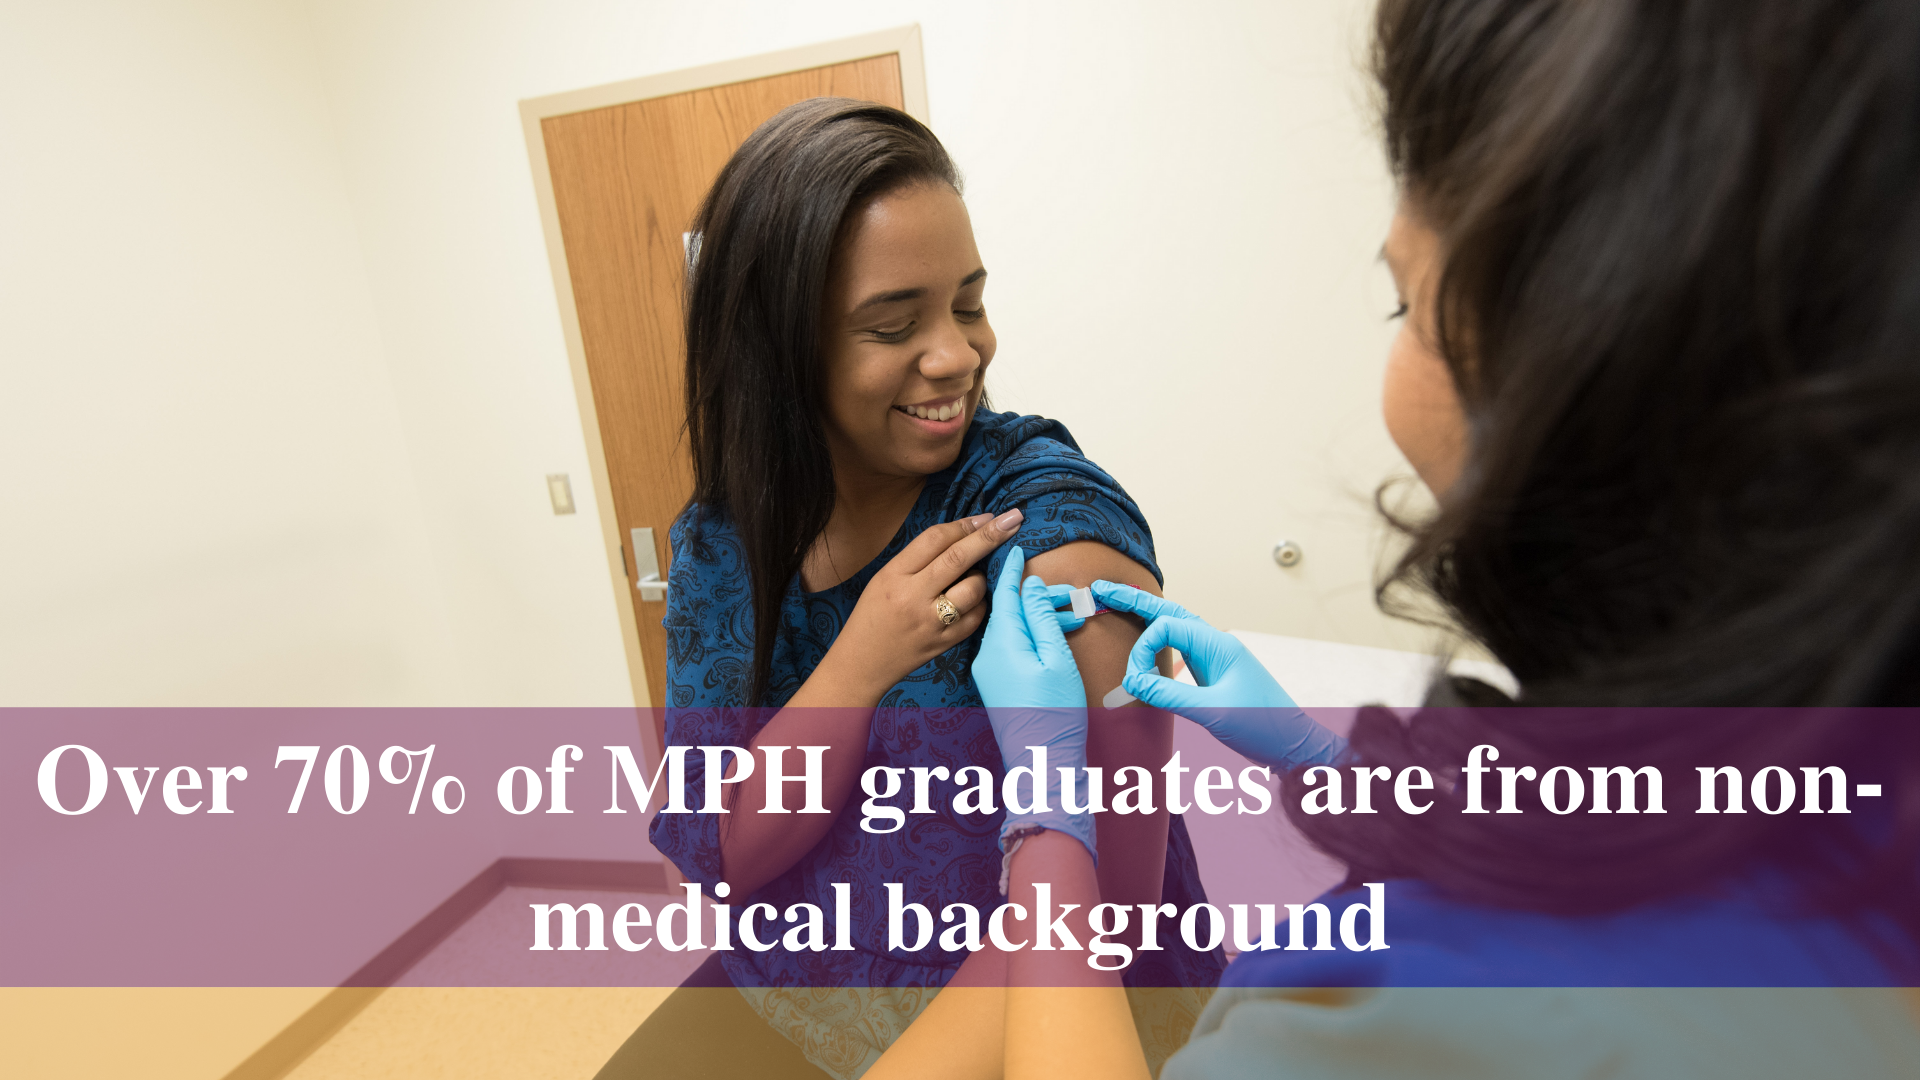 Over 70% of MPH graduates are from non-medical background